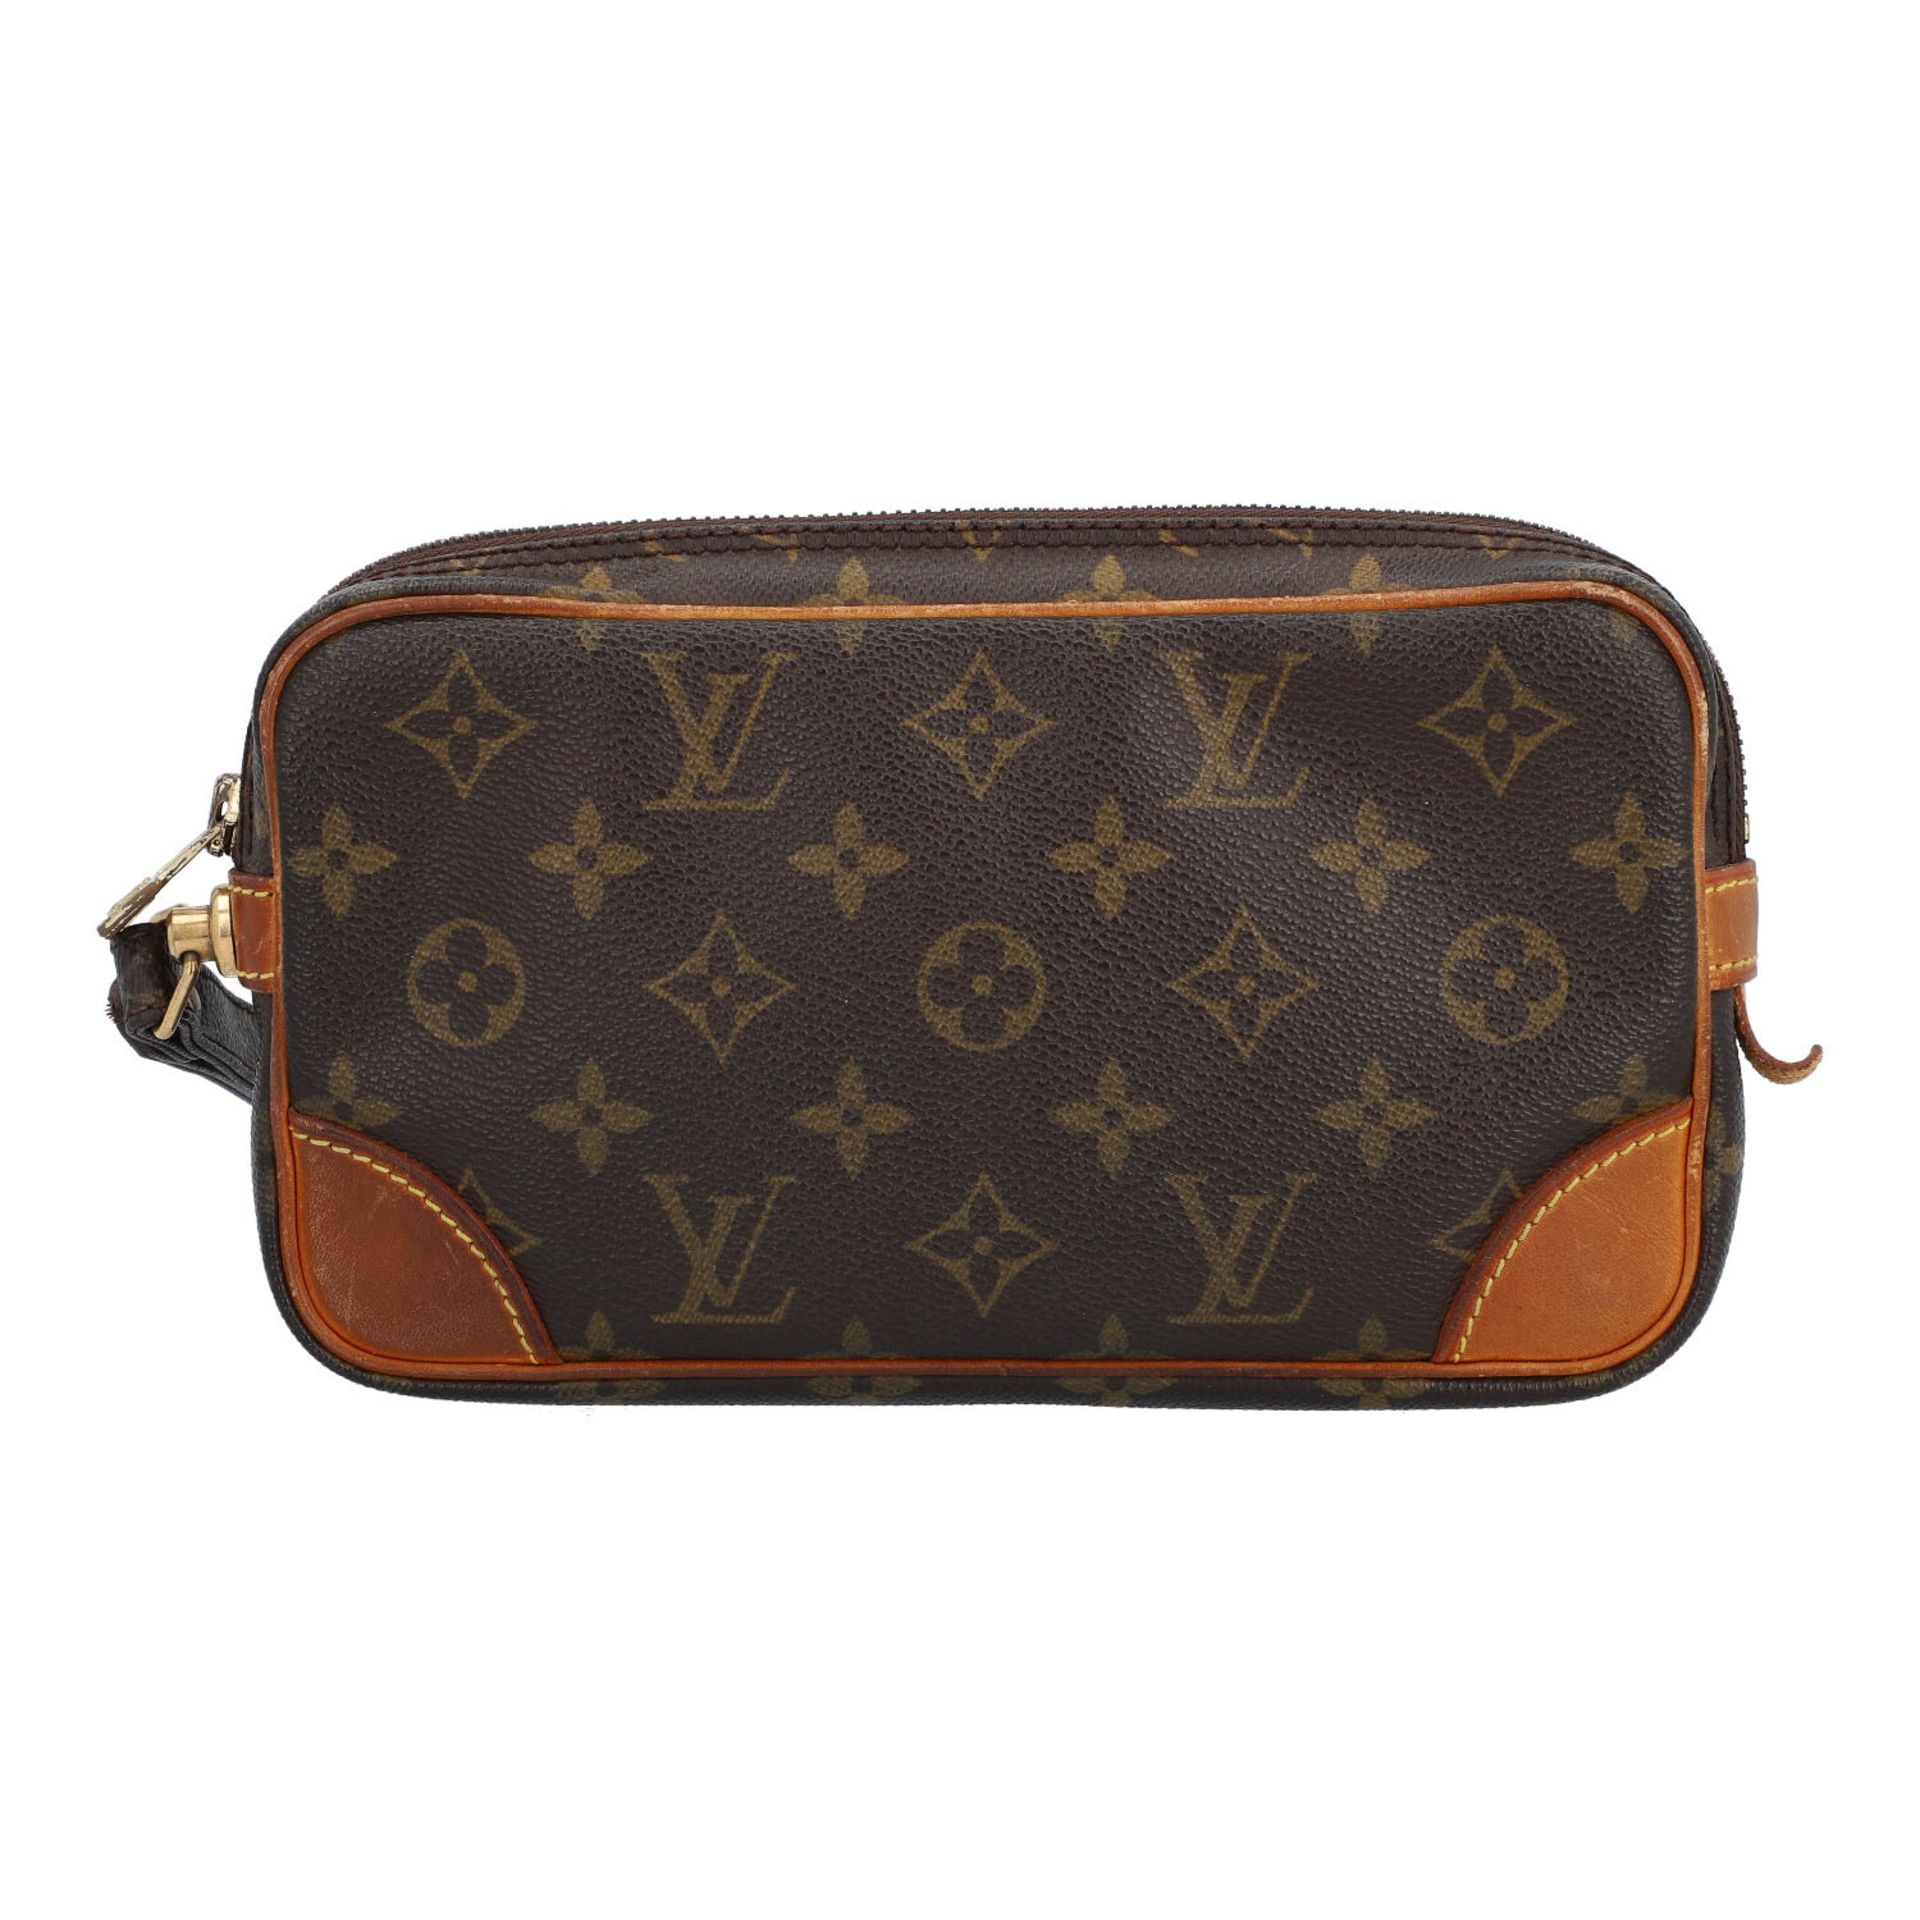 LOUIS VUITTON VINTAGE Clutch "MARLY DRAGONE", Koll. 1988. - Image 4 of 6